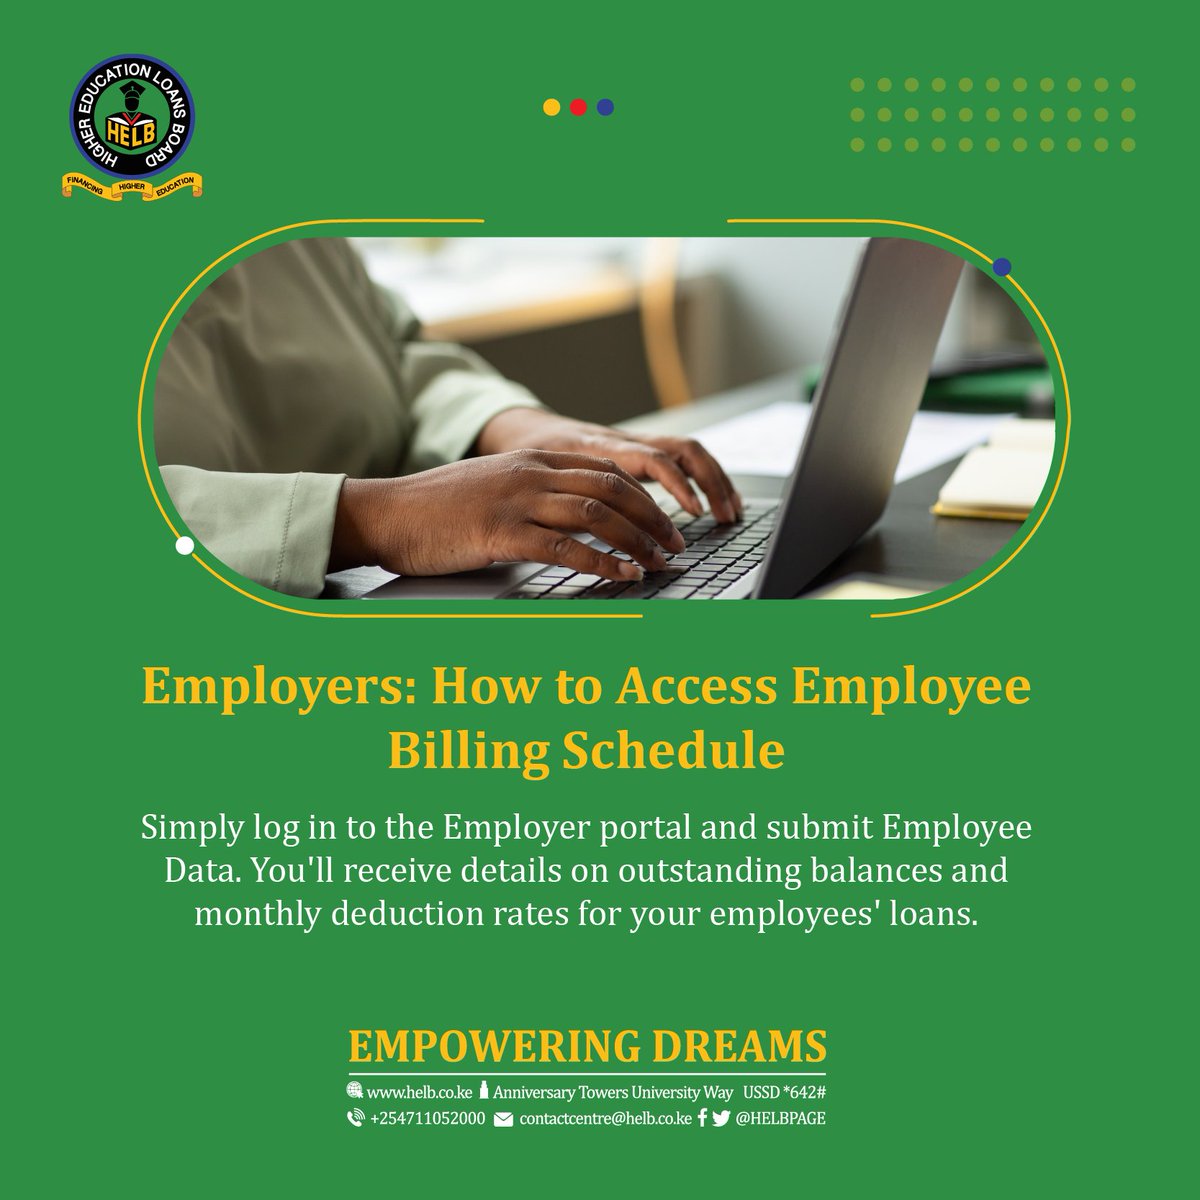 Employers, login to bit.ly/48UXUIf and fulfill your obligations by disclosing, deducting, and discharging HELB loans for your employees.